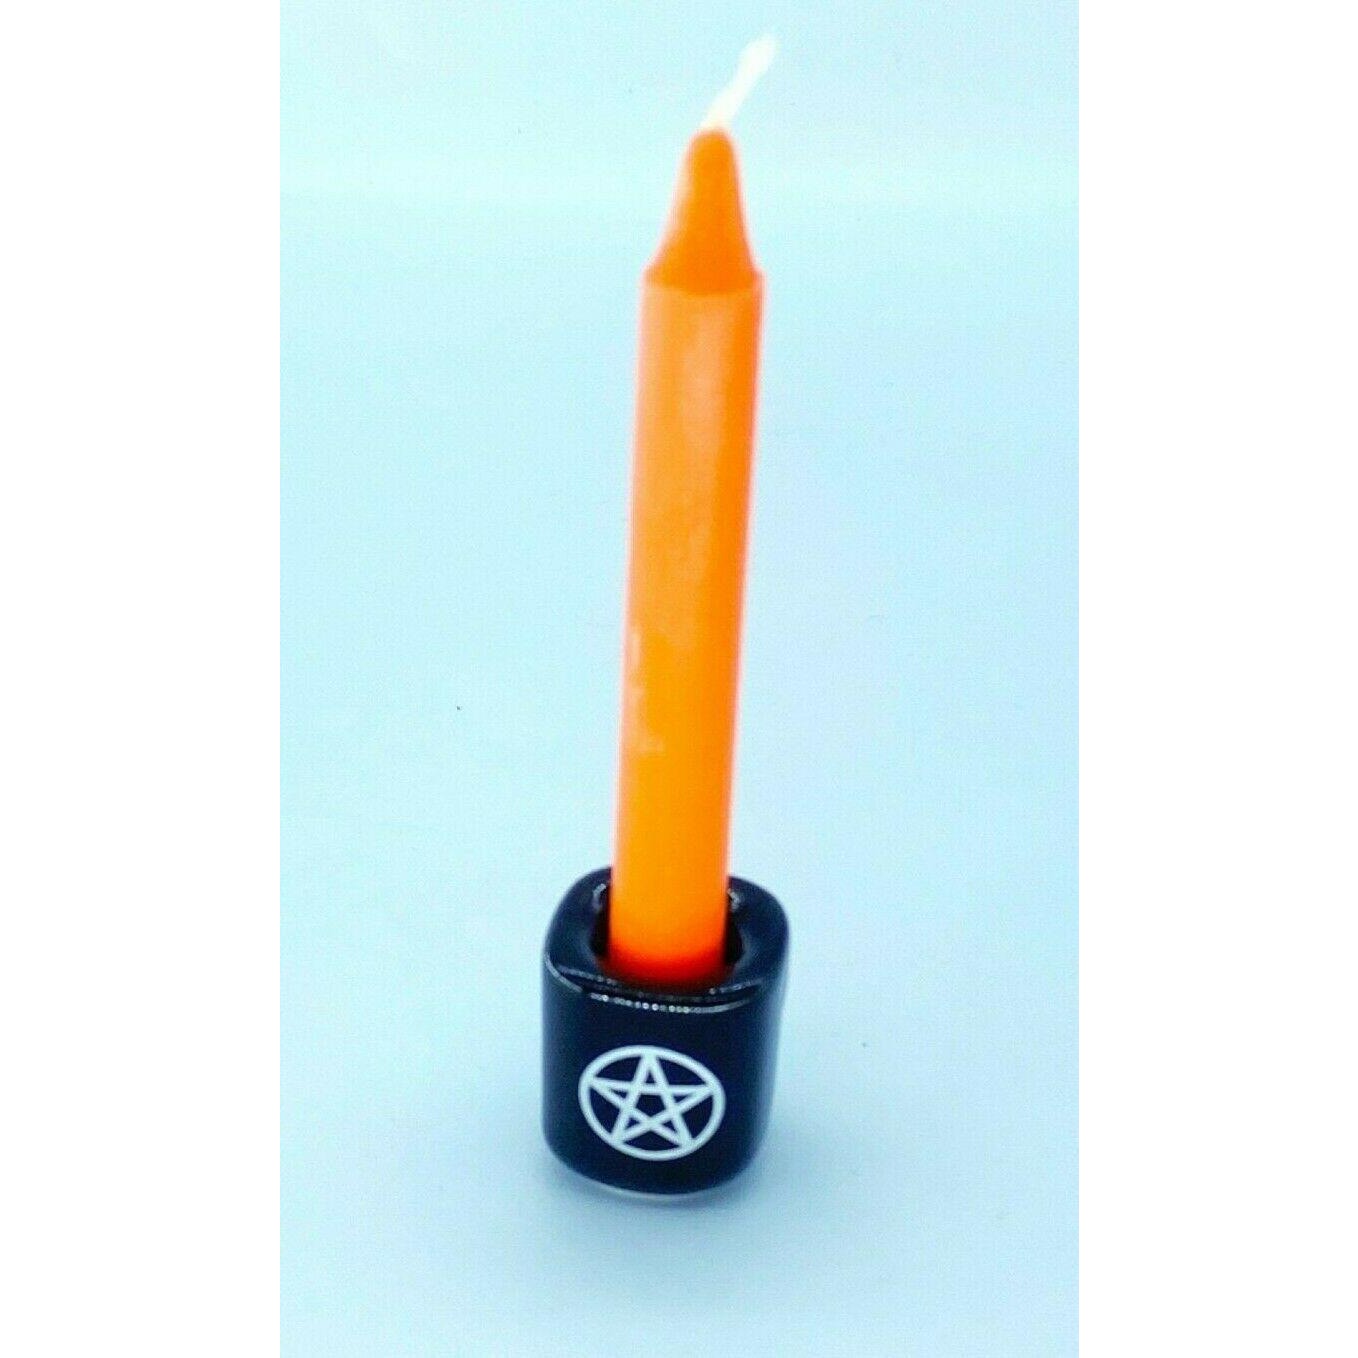 Pentacle Ceramic Spell Candle Holder (Black & Silver) for 4" Mini Chime Candles